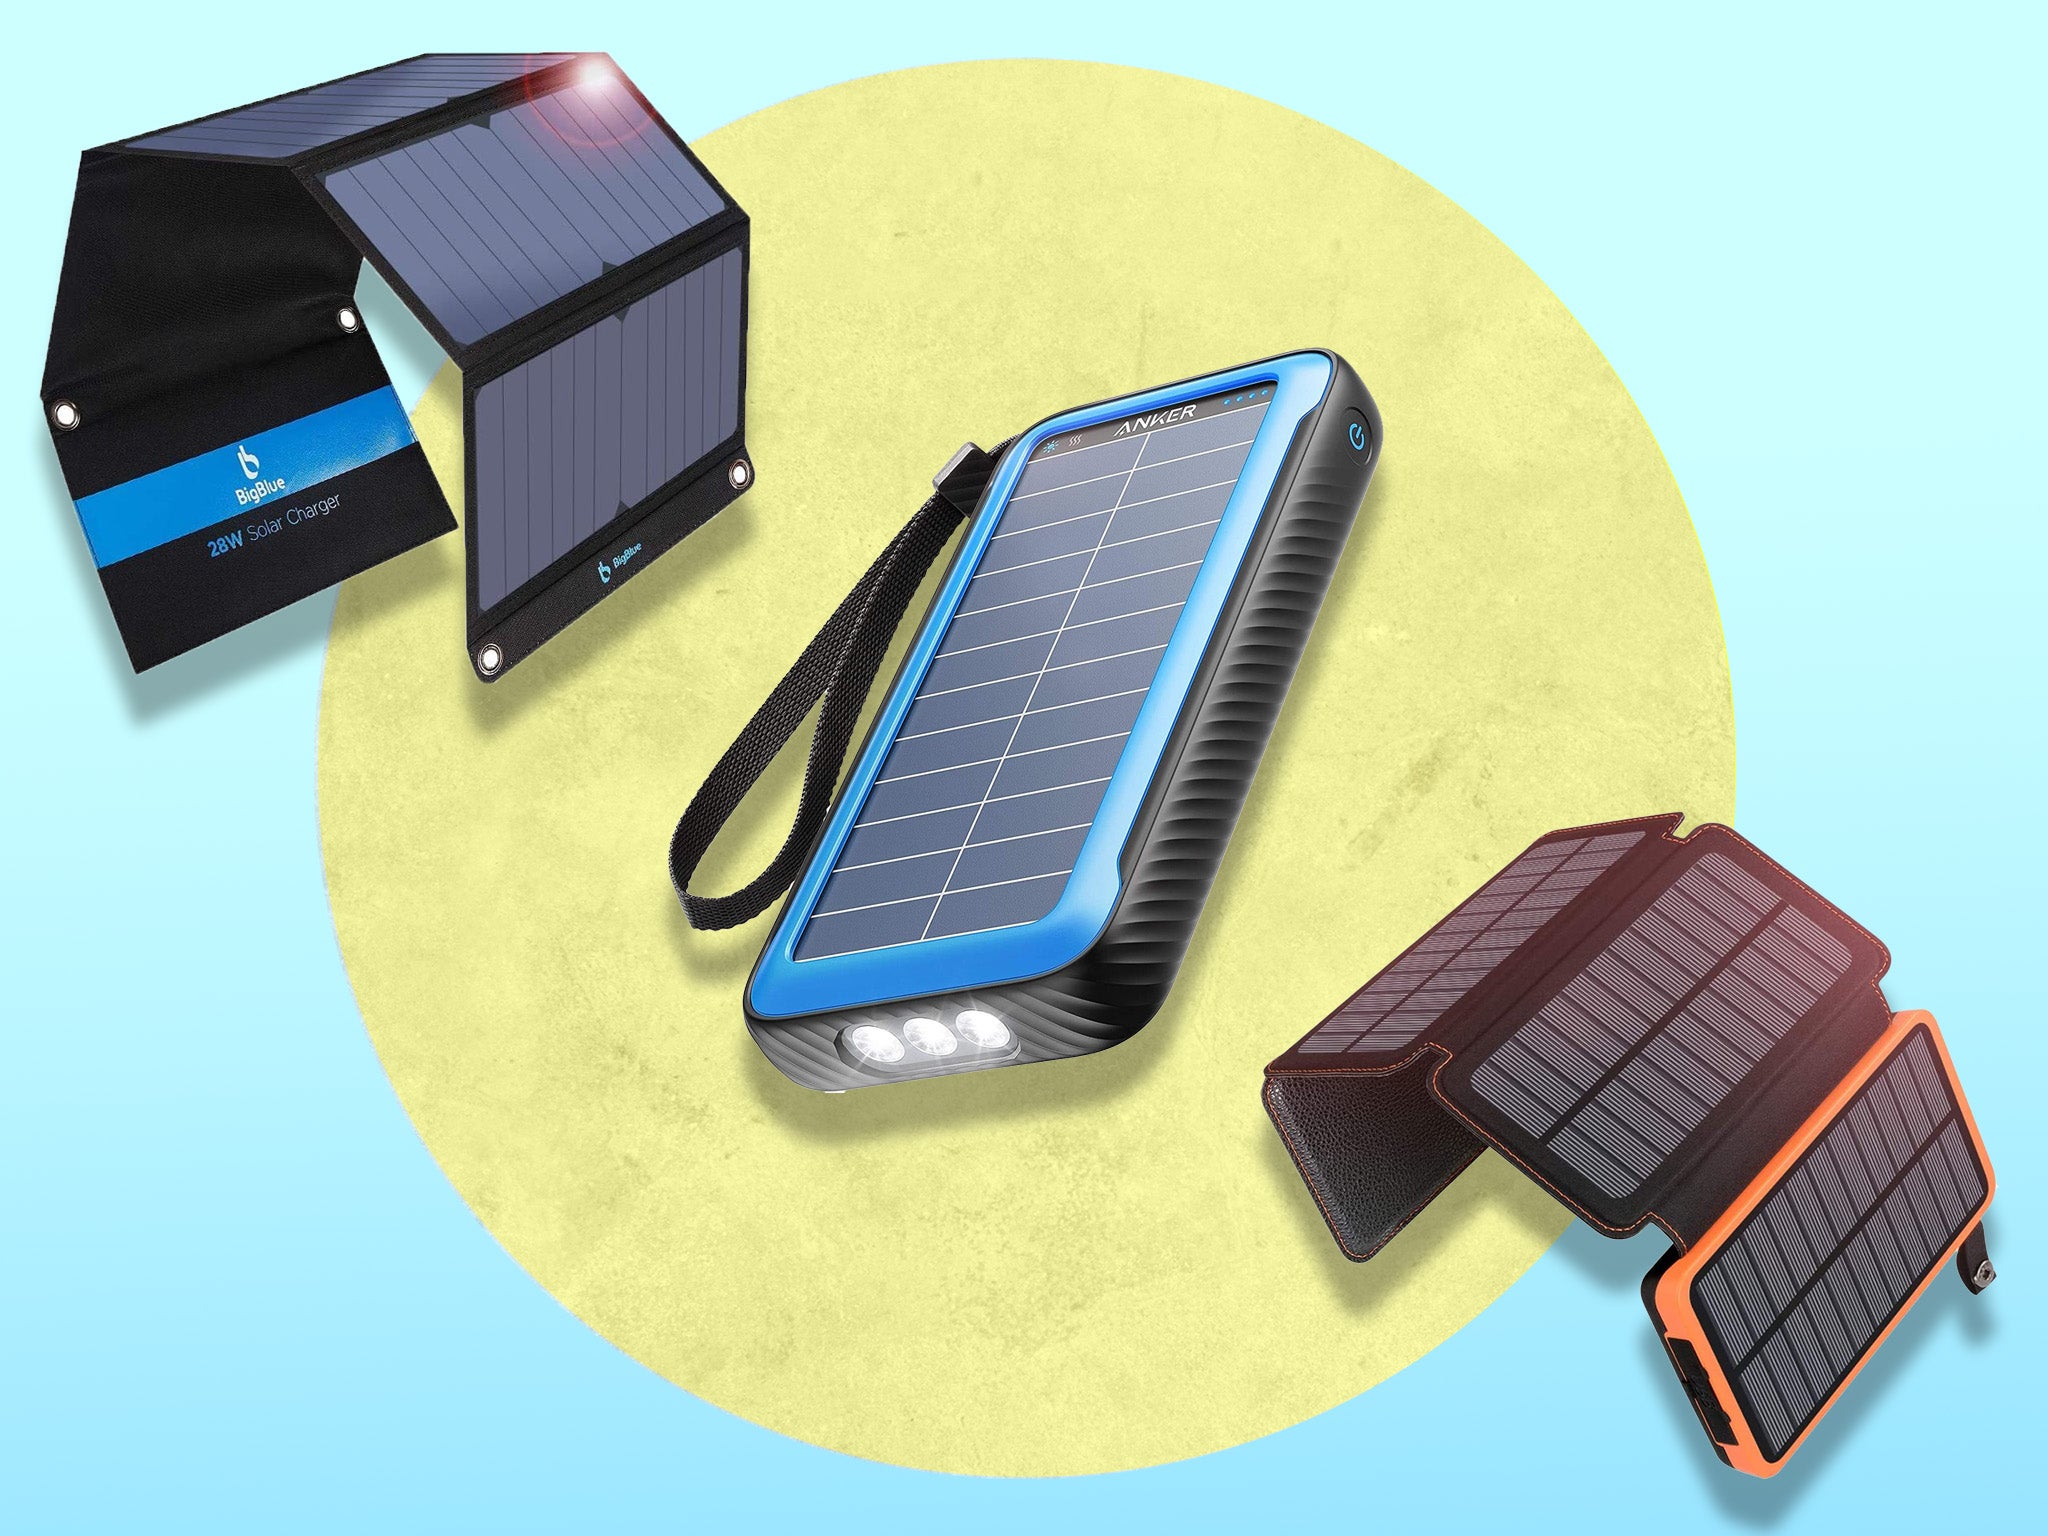 USB-alligator clip combo set  turn your solar panel into a phone charger diy 